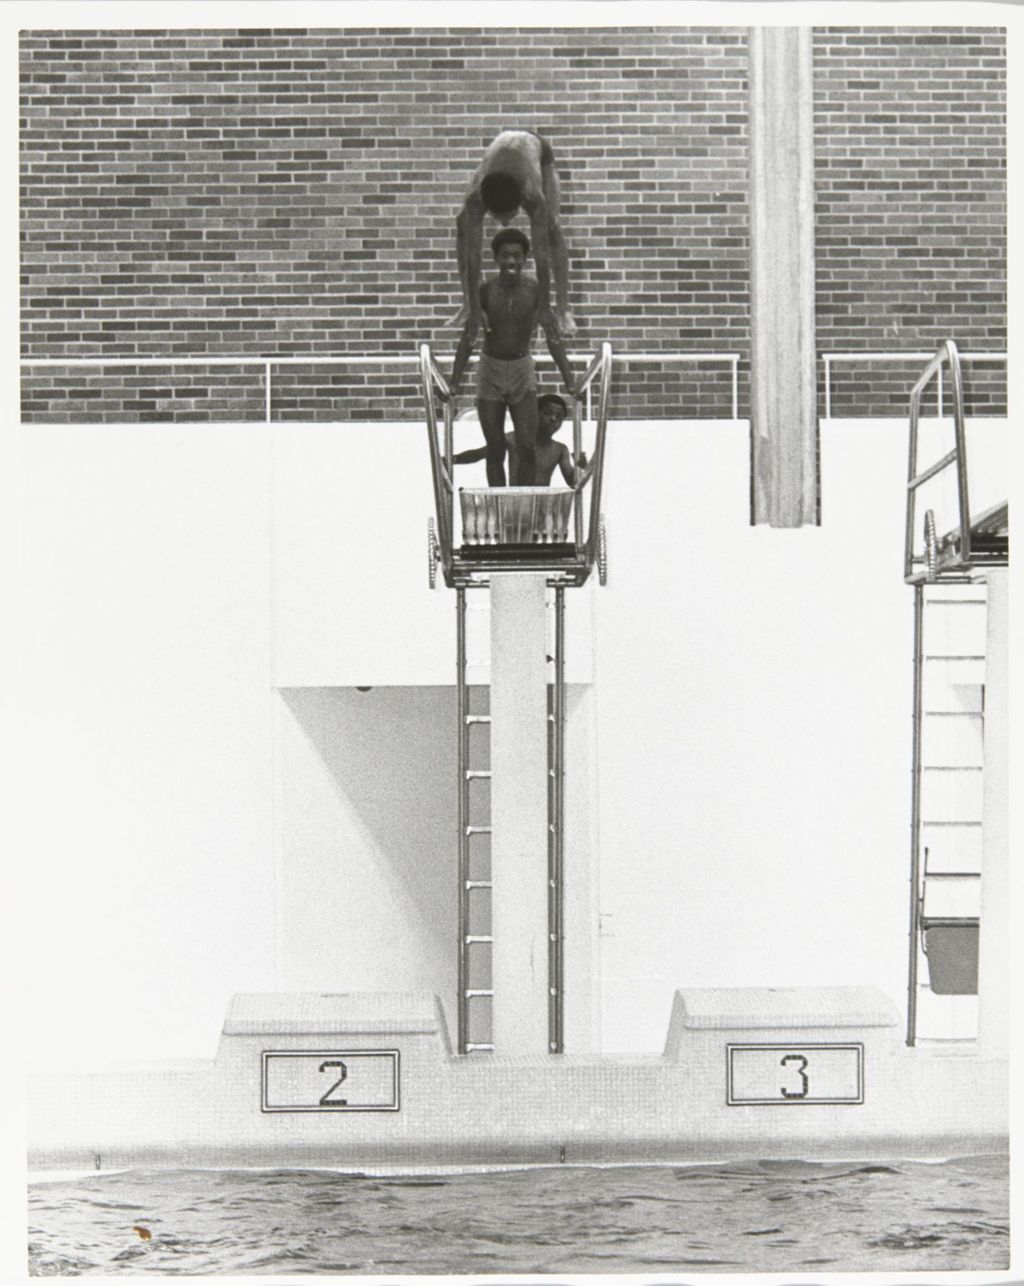 Miniature of People on the diving board during Mayor Richard J. Daley's Girls Summer Program